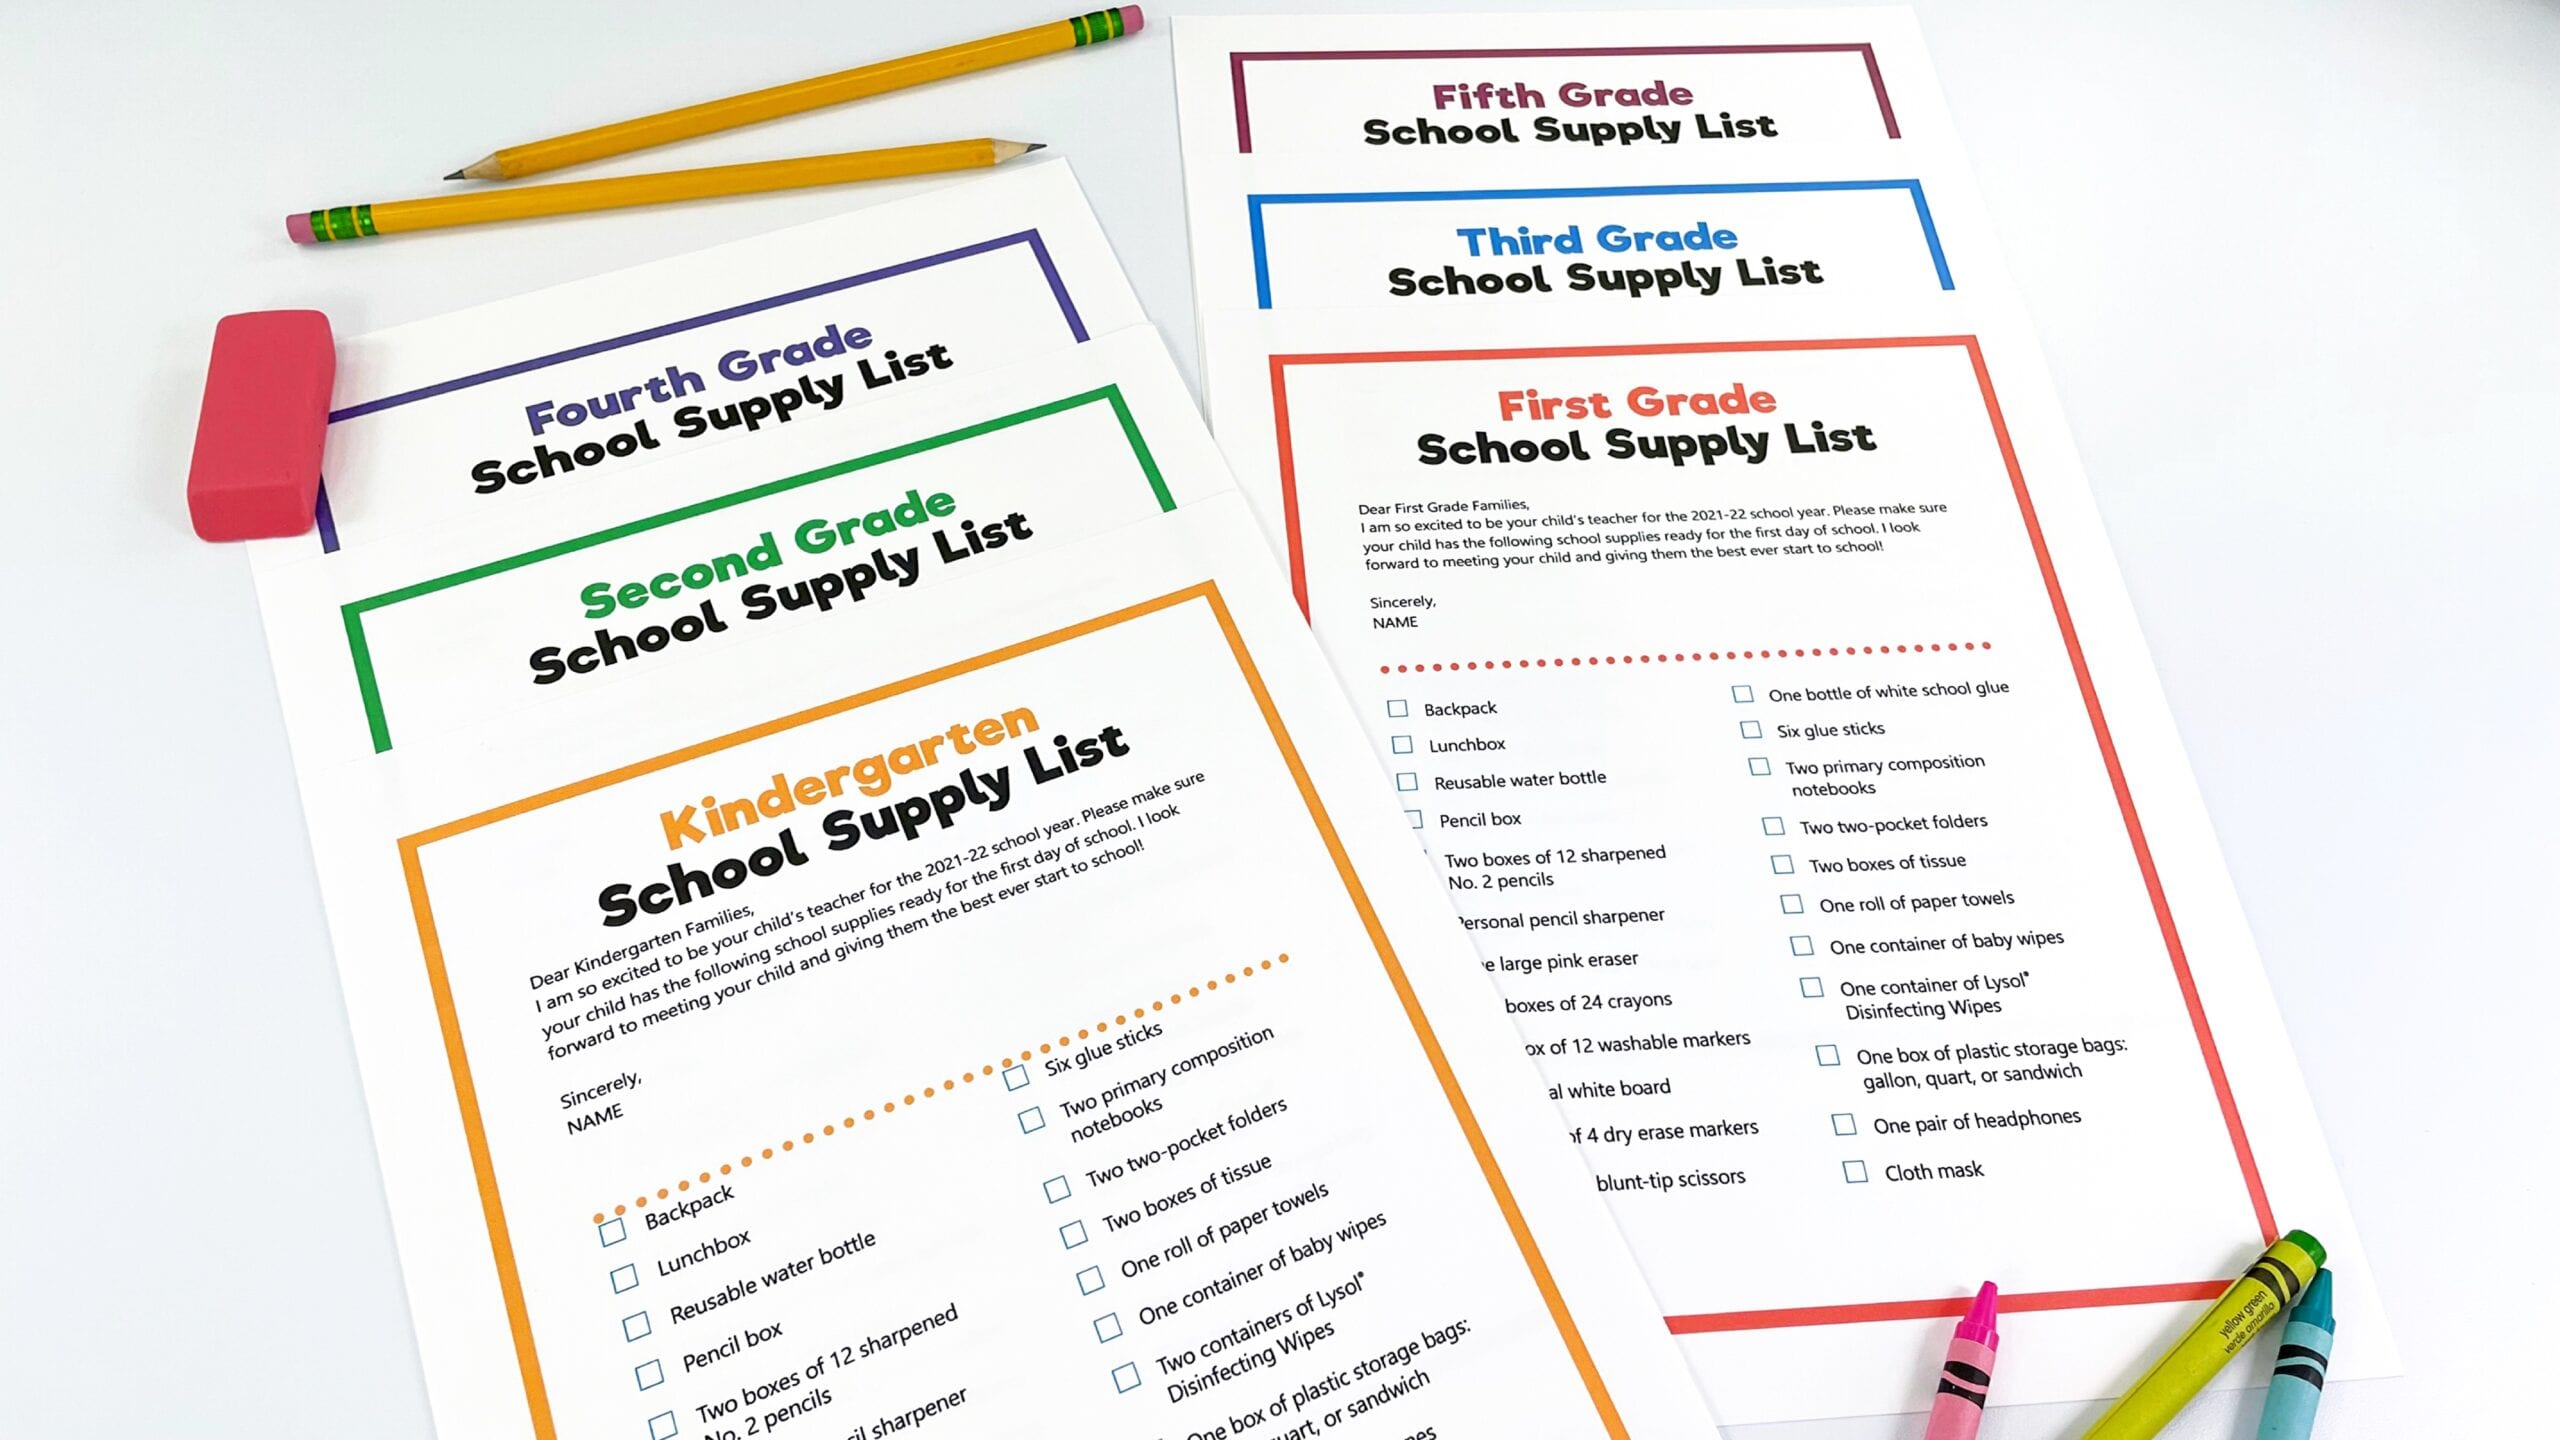 get-these-free-school-supply-lists-one-for-each-grade-k-5